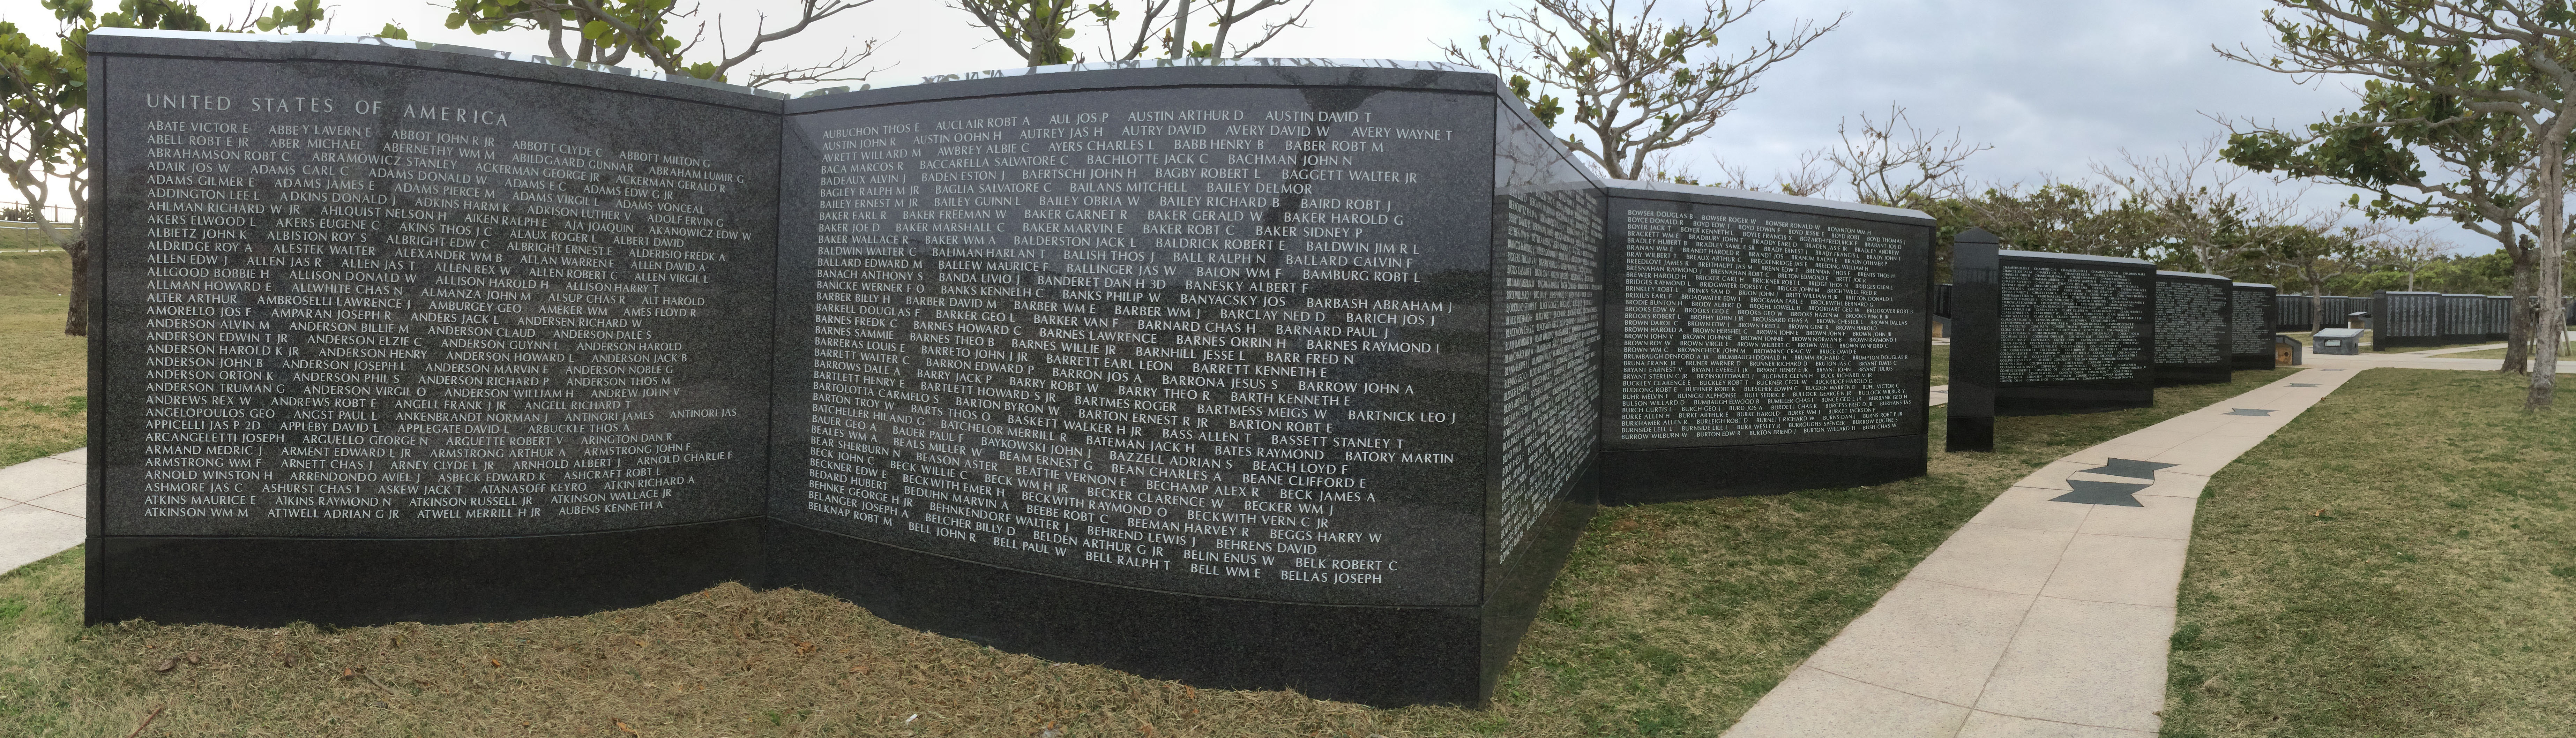 Huge sacrifice: The names of the 14,009 American service members who lost their lives in the Battle of Okinawa 70 years ago are etched into the Cornerstone of Peace in Itoman, Okinawa. | JON MITCHELL